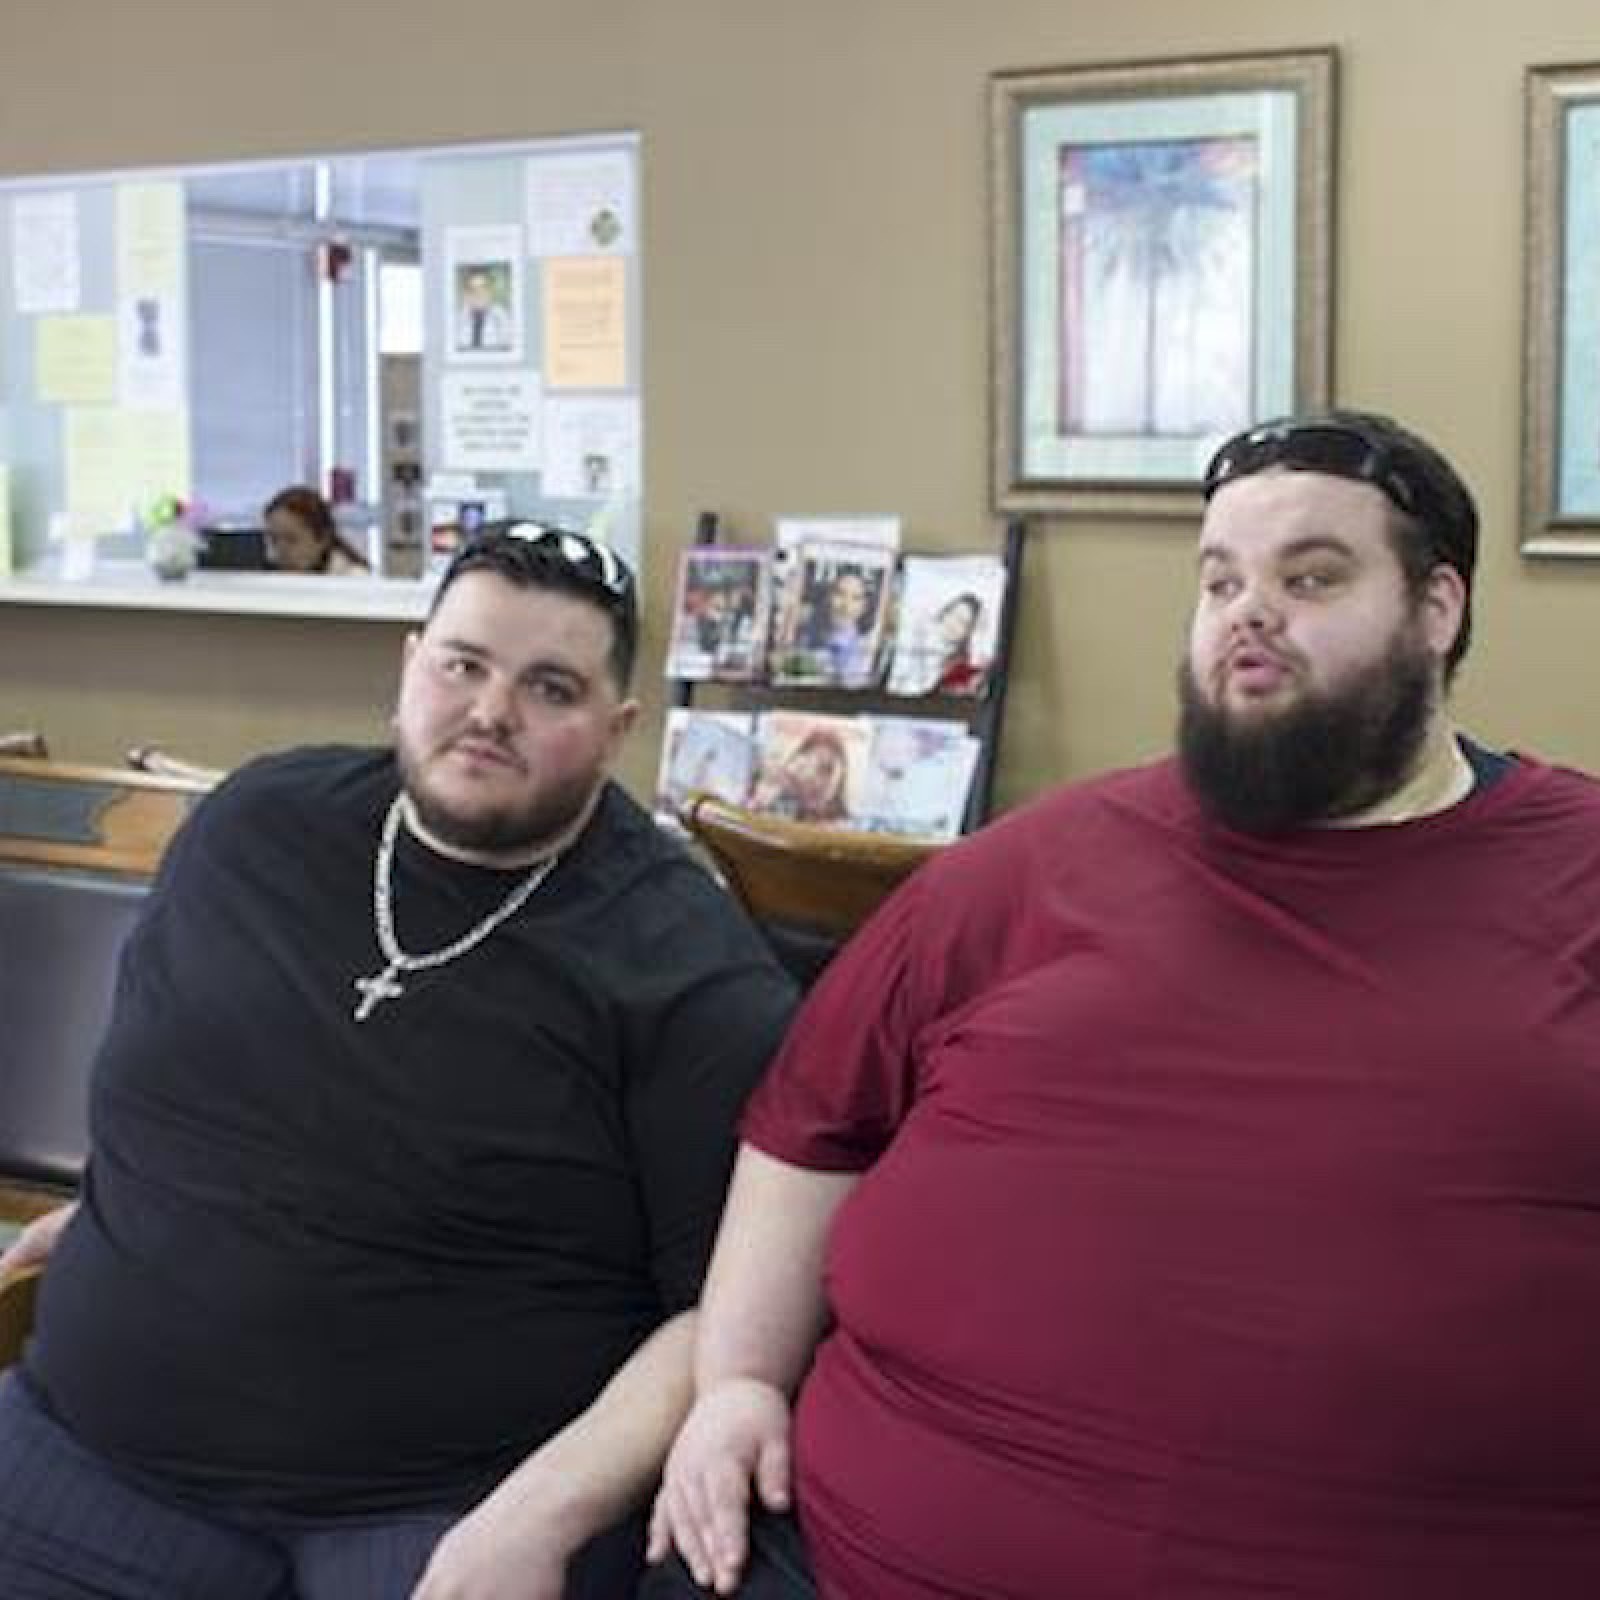 What Dr. Now Has Been Saying About My 600-Lb Life Season 11